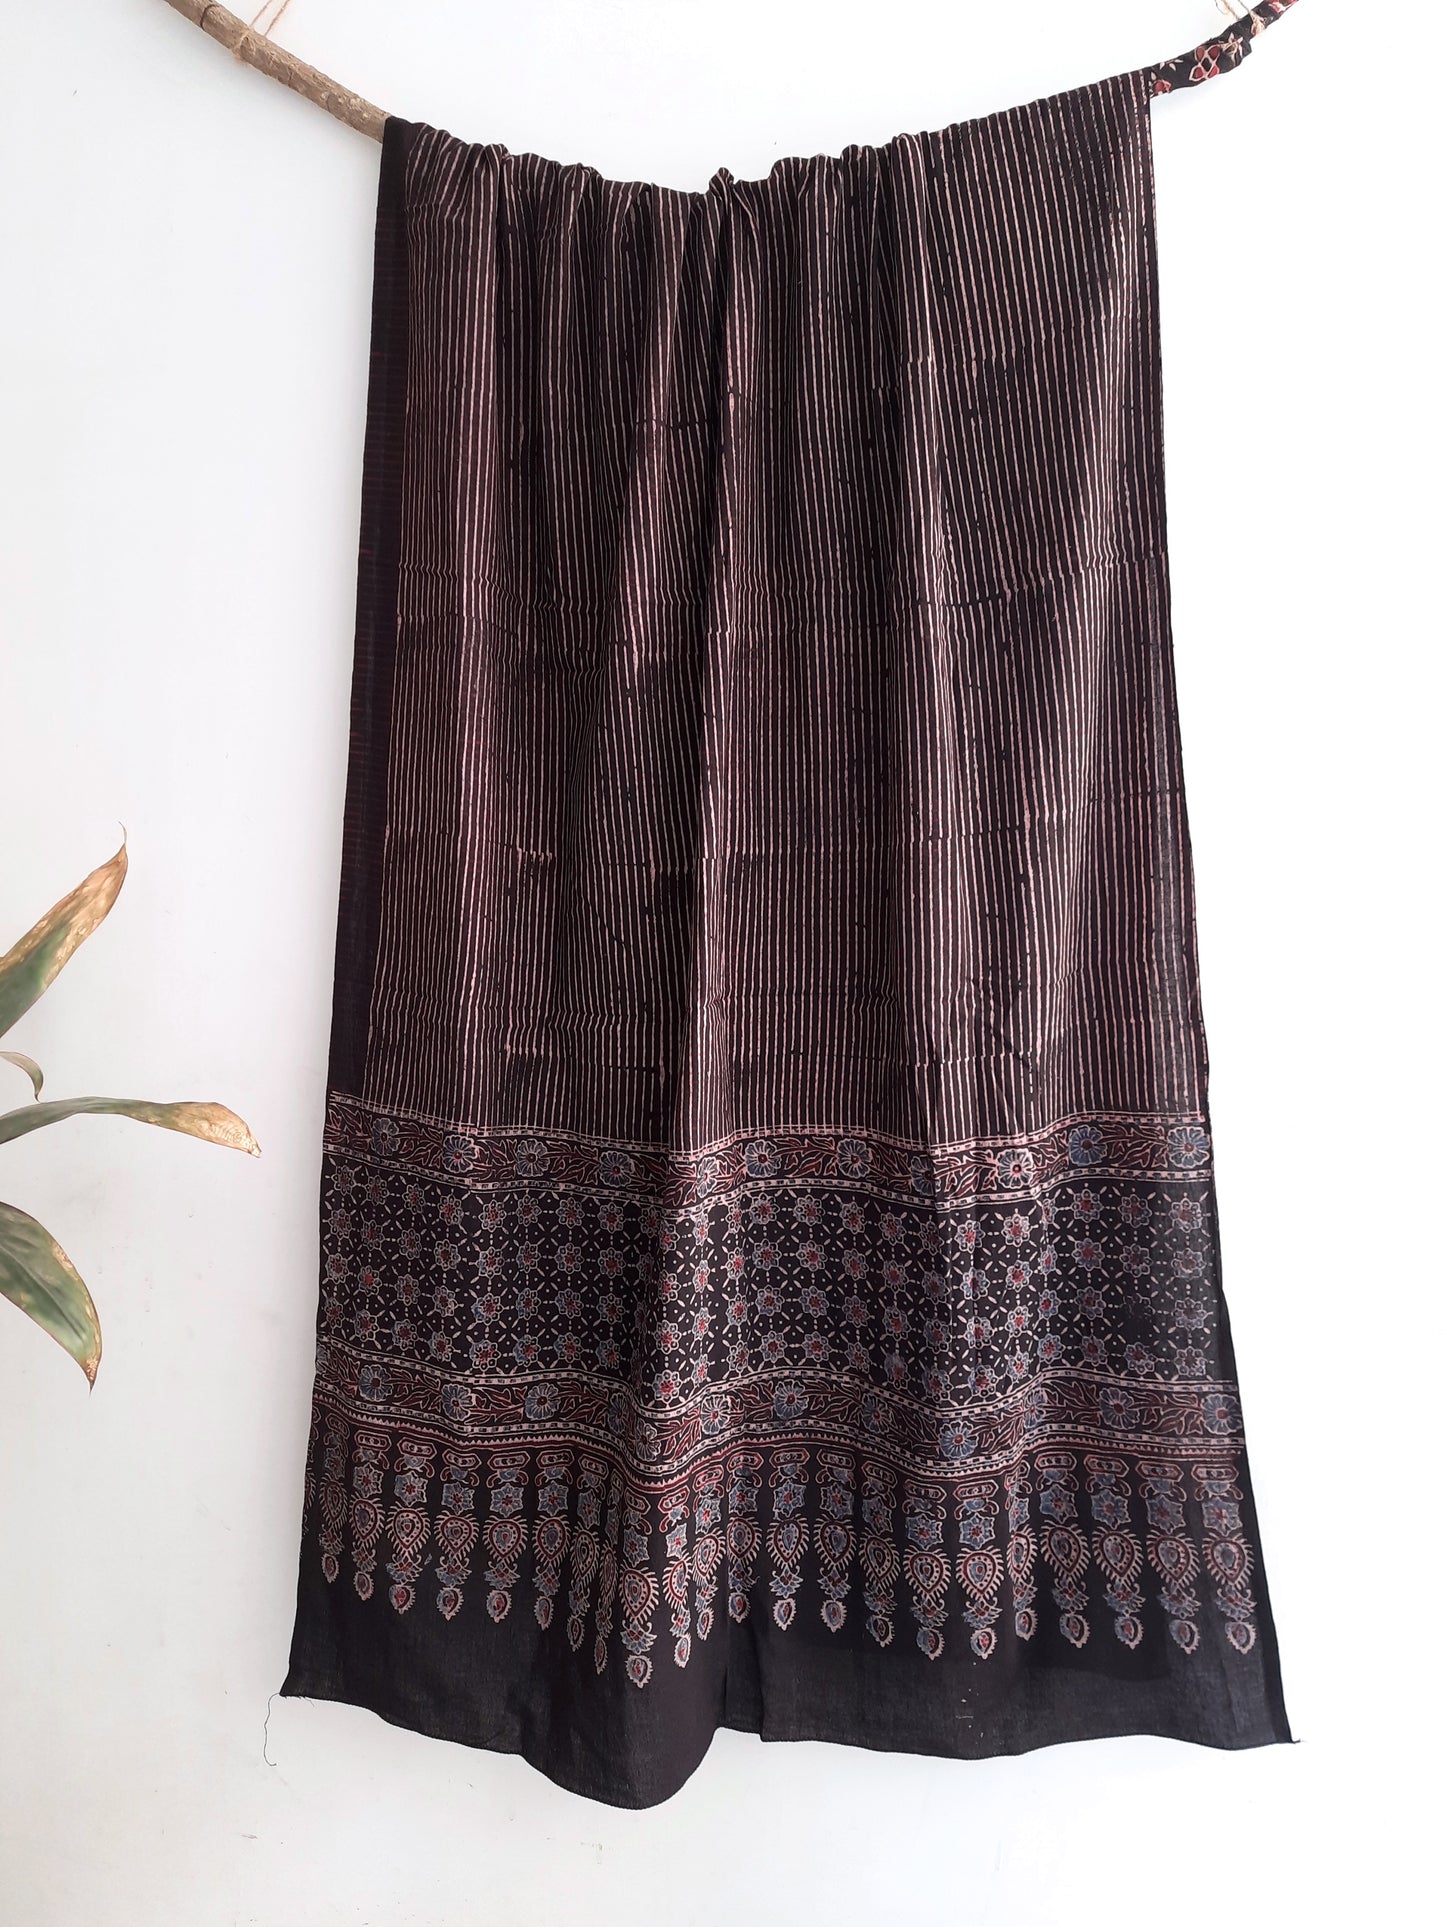 Handmade Ajrakh hand block printed cotton dupatta in checks print, dyed using natural resources. Expertly crafted by artisans in India, this artisanal accessory combines traditional techniques with sustainable practices, adding a touch of heritage to your style.